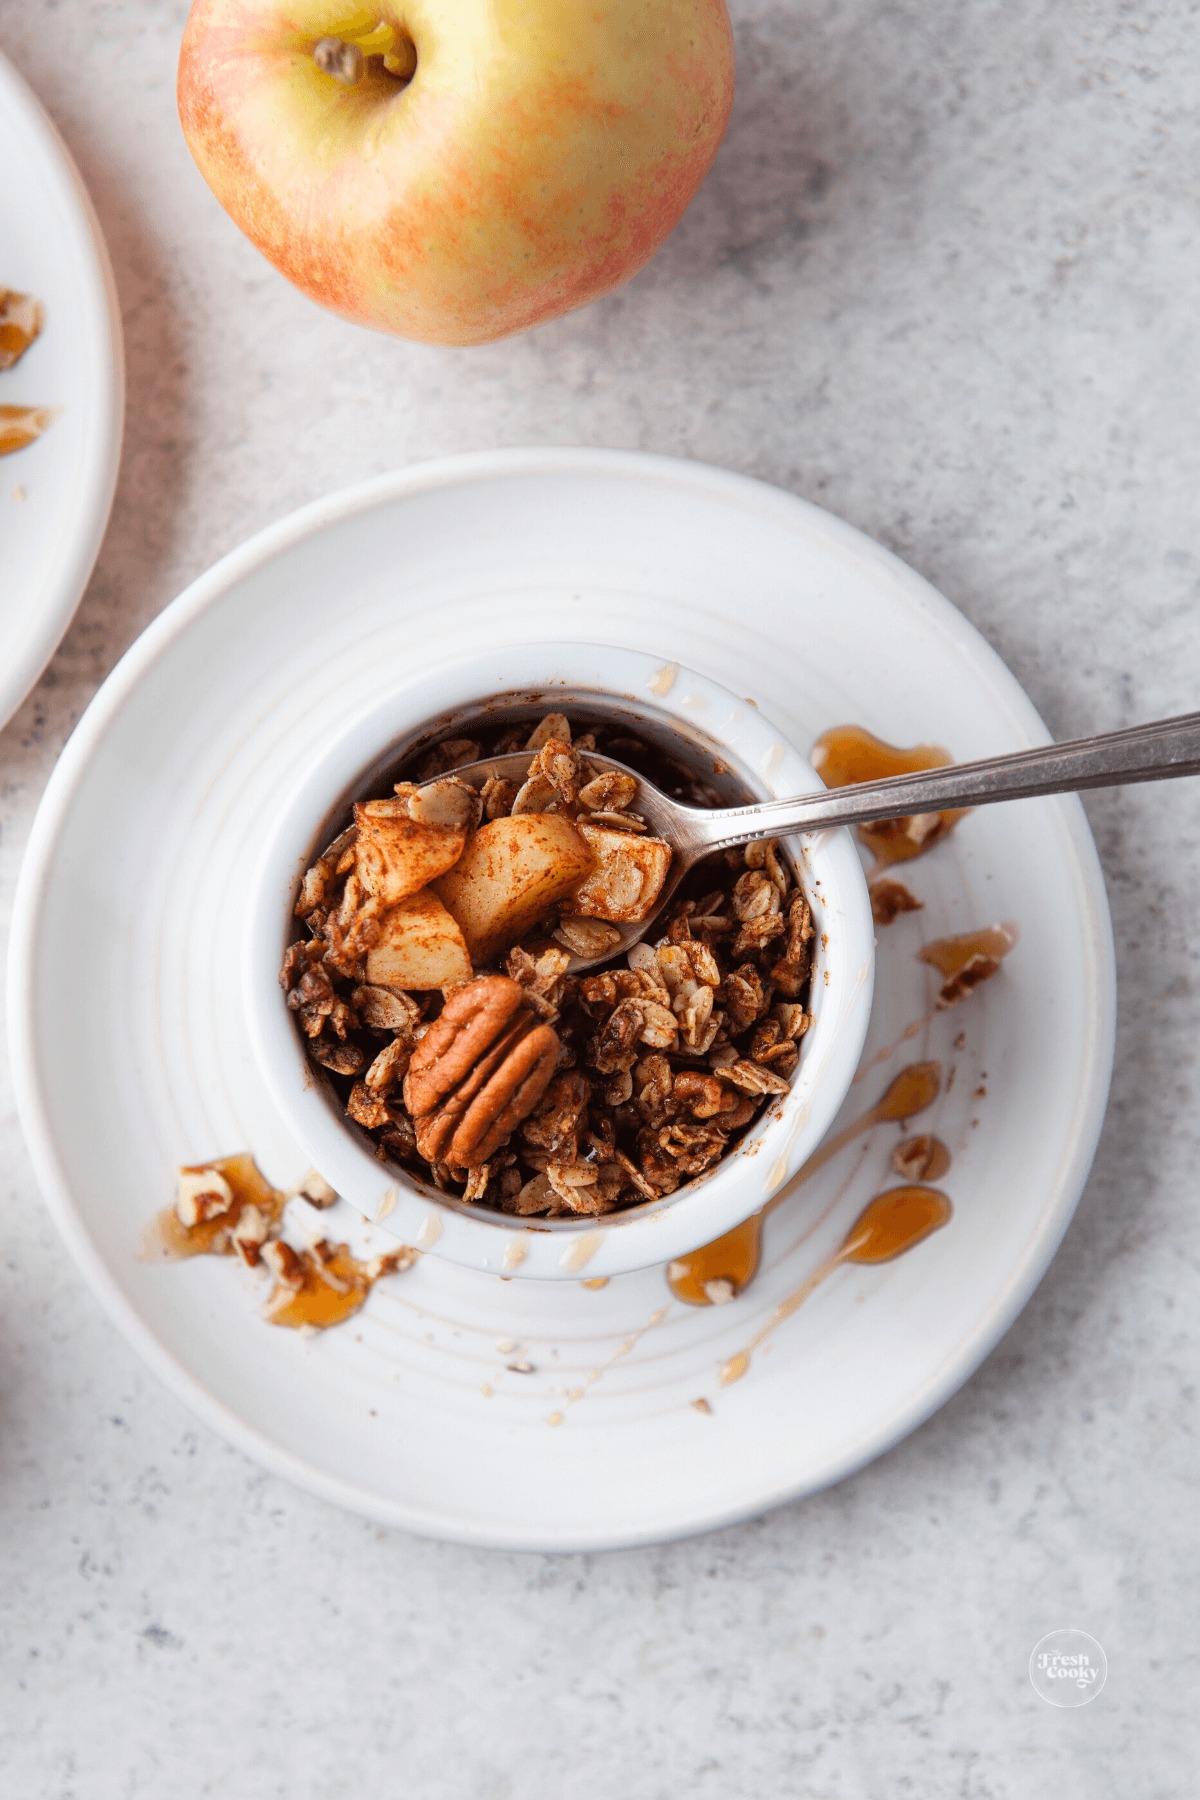 Apple crisp serving on a plate that is drizzled with maple syrup.